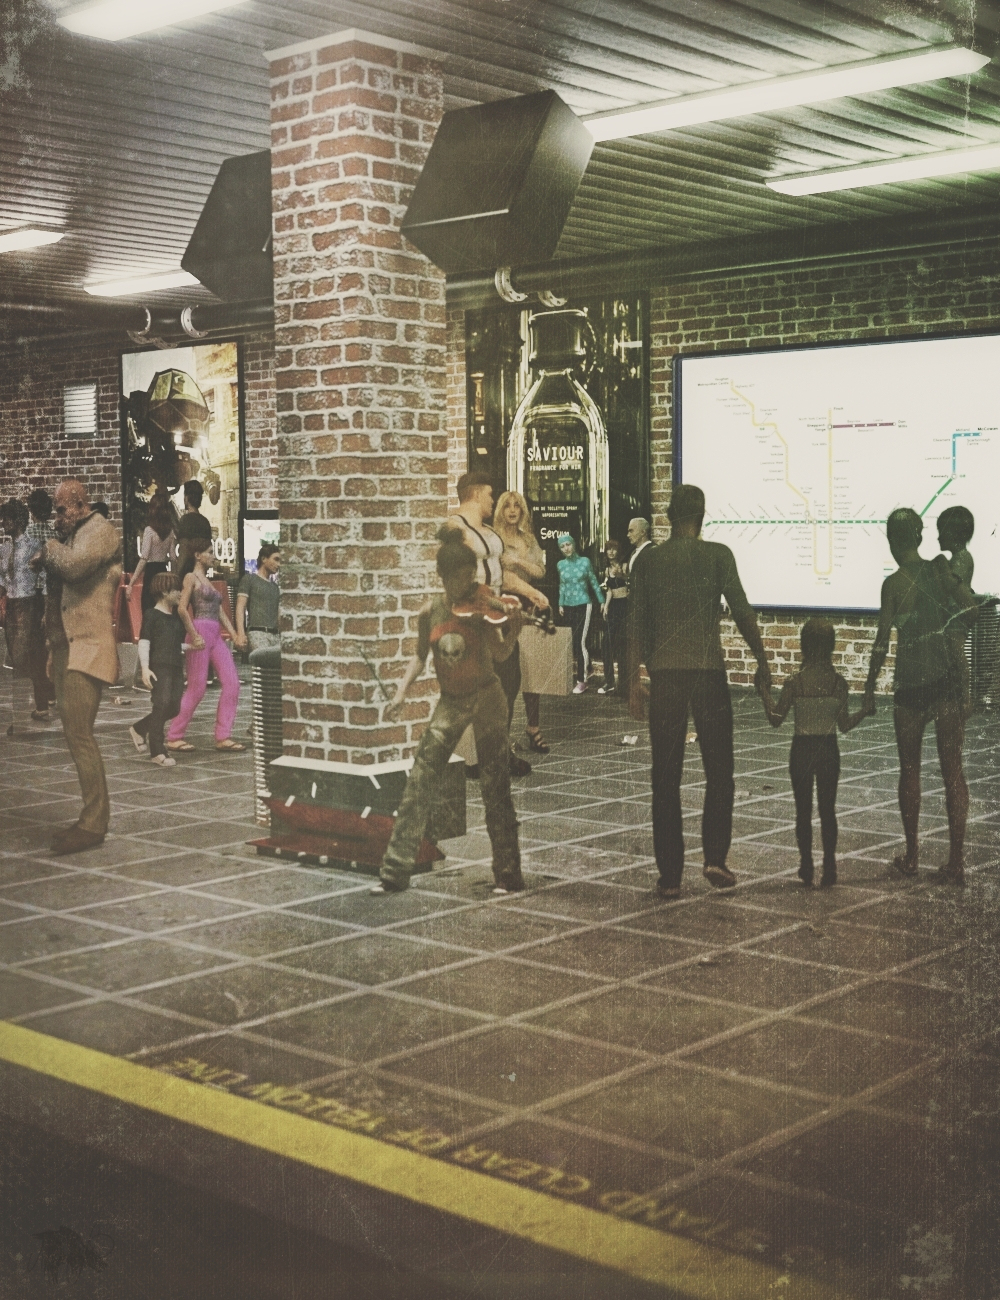 Subway Platform For Iray by: Serum, 3D Models by Daz 3D